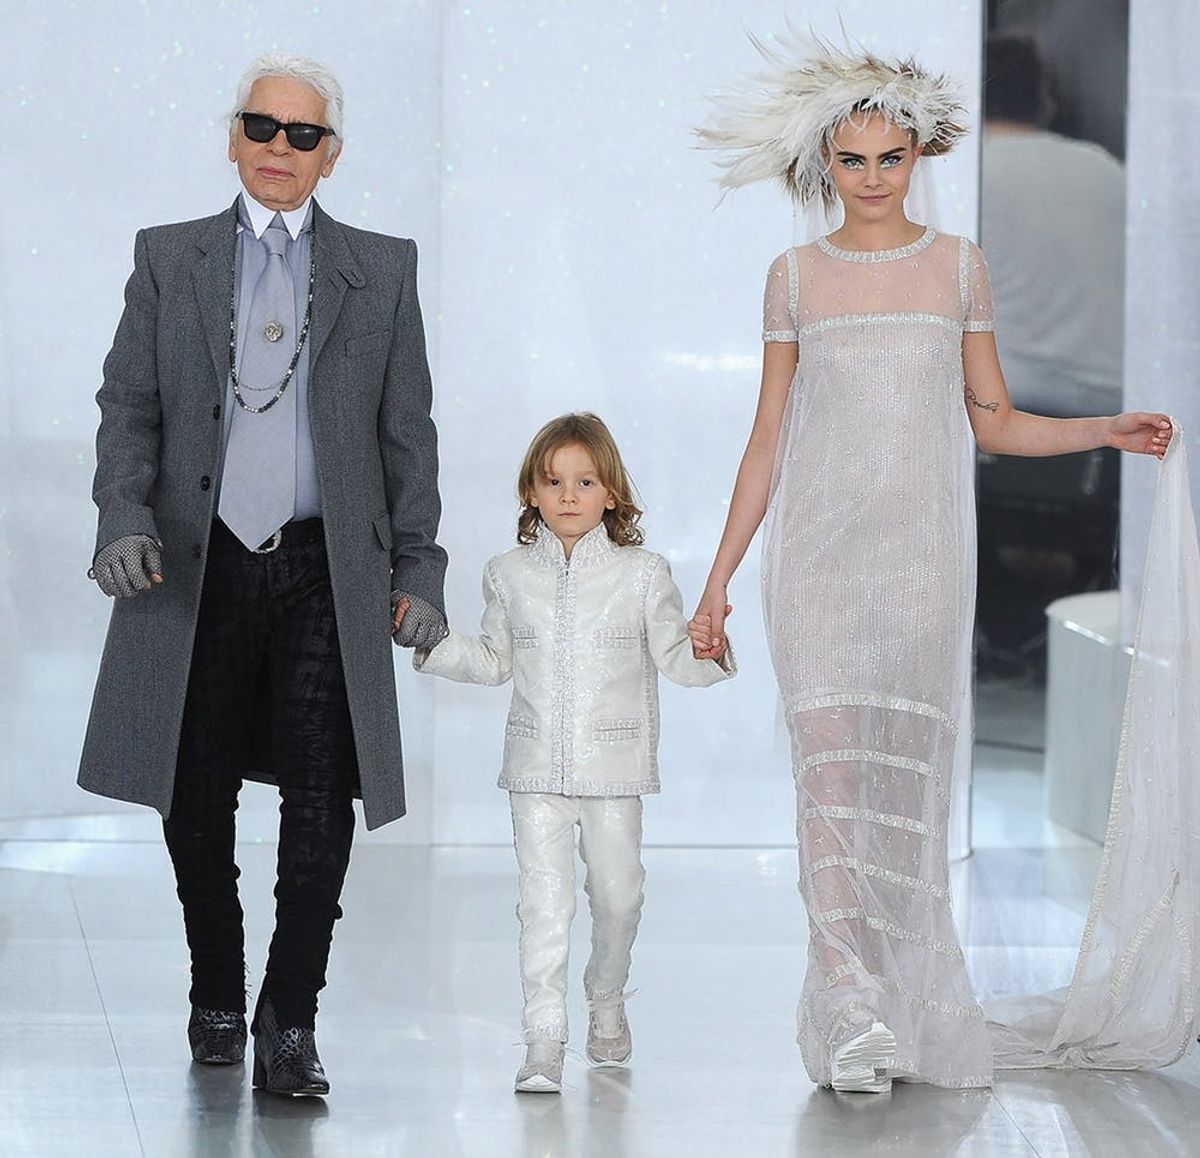 Here’s How Karl Lagerfeld Wants to Dress Your Kids